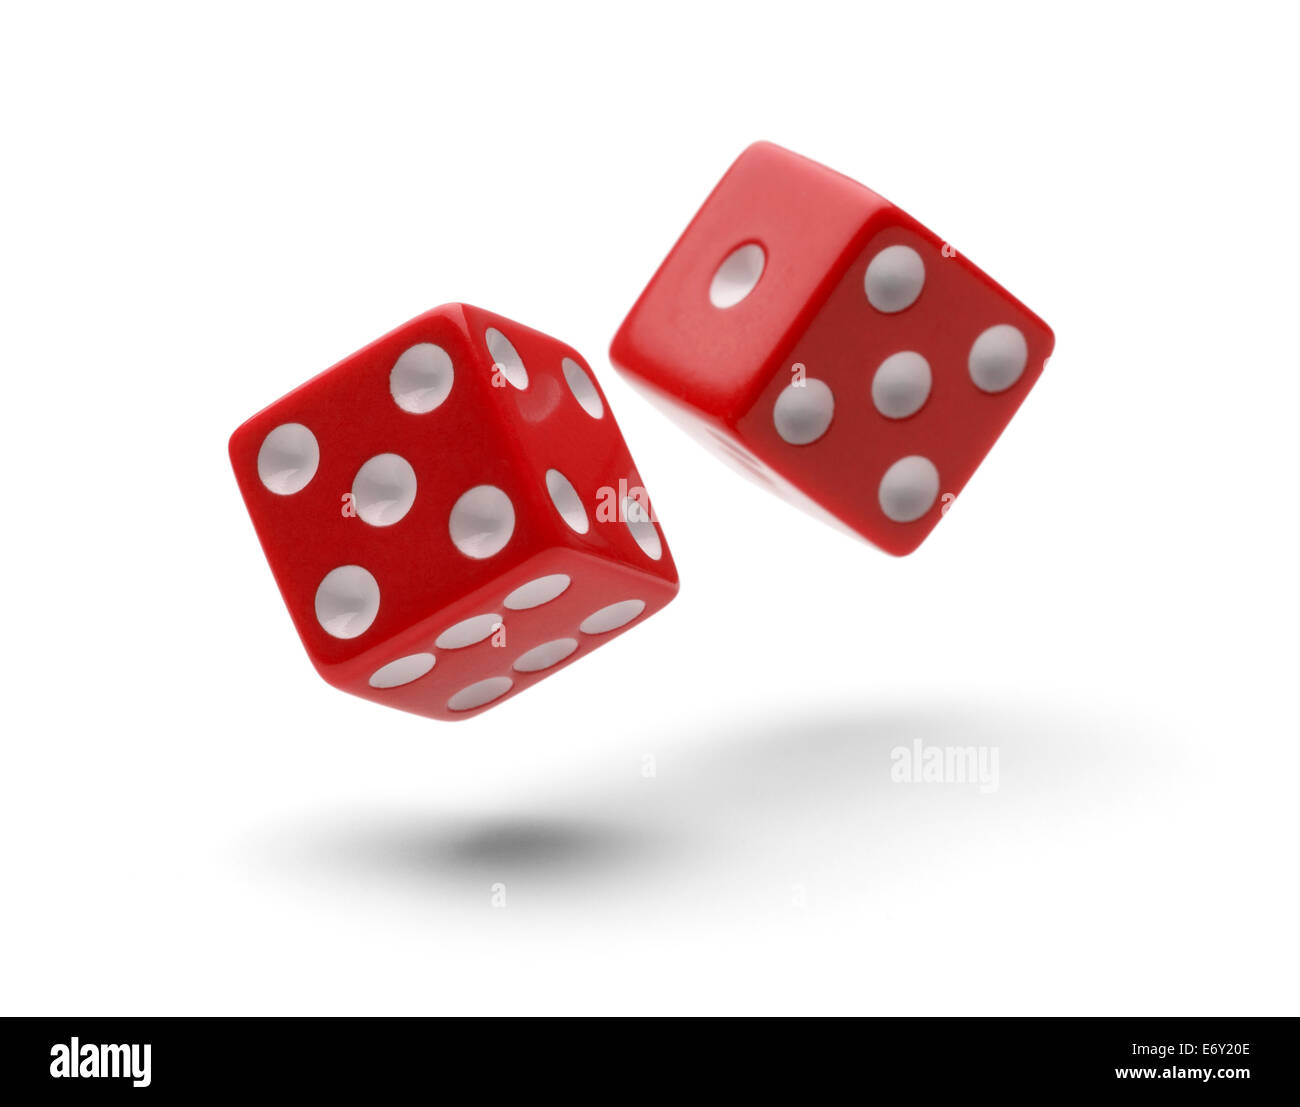 Red Dice in Air Rolling with Shadows Isolated on White Background. Stock Photo